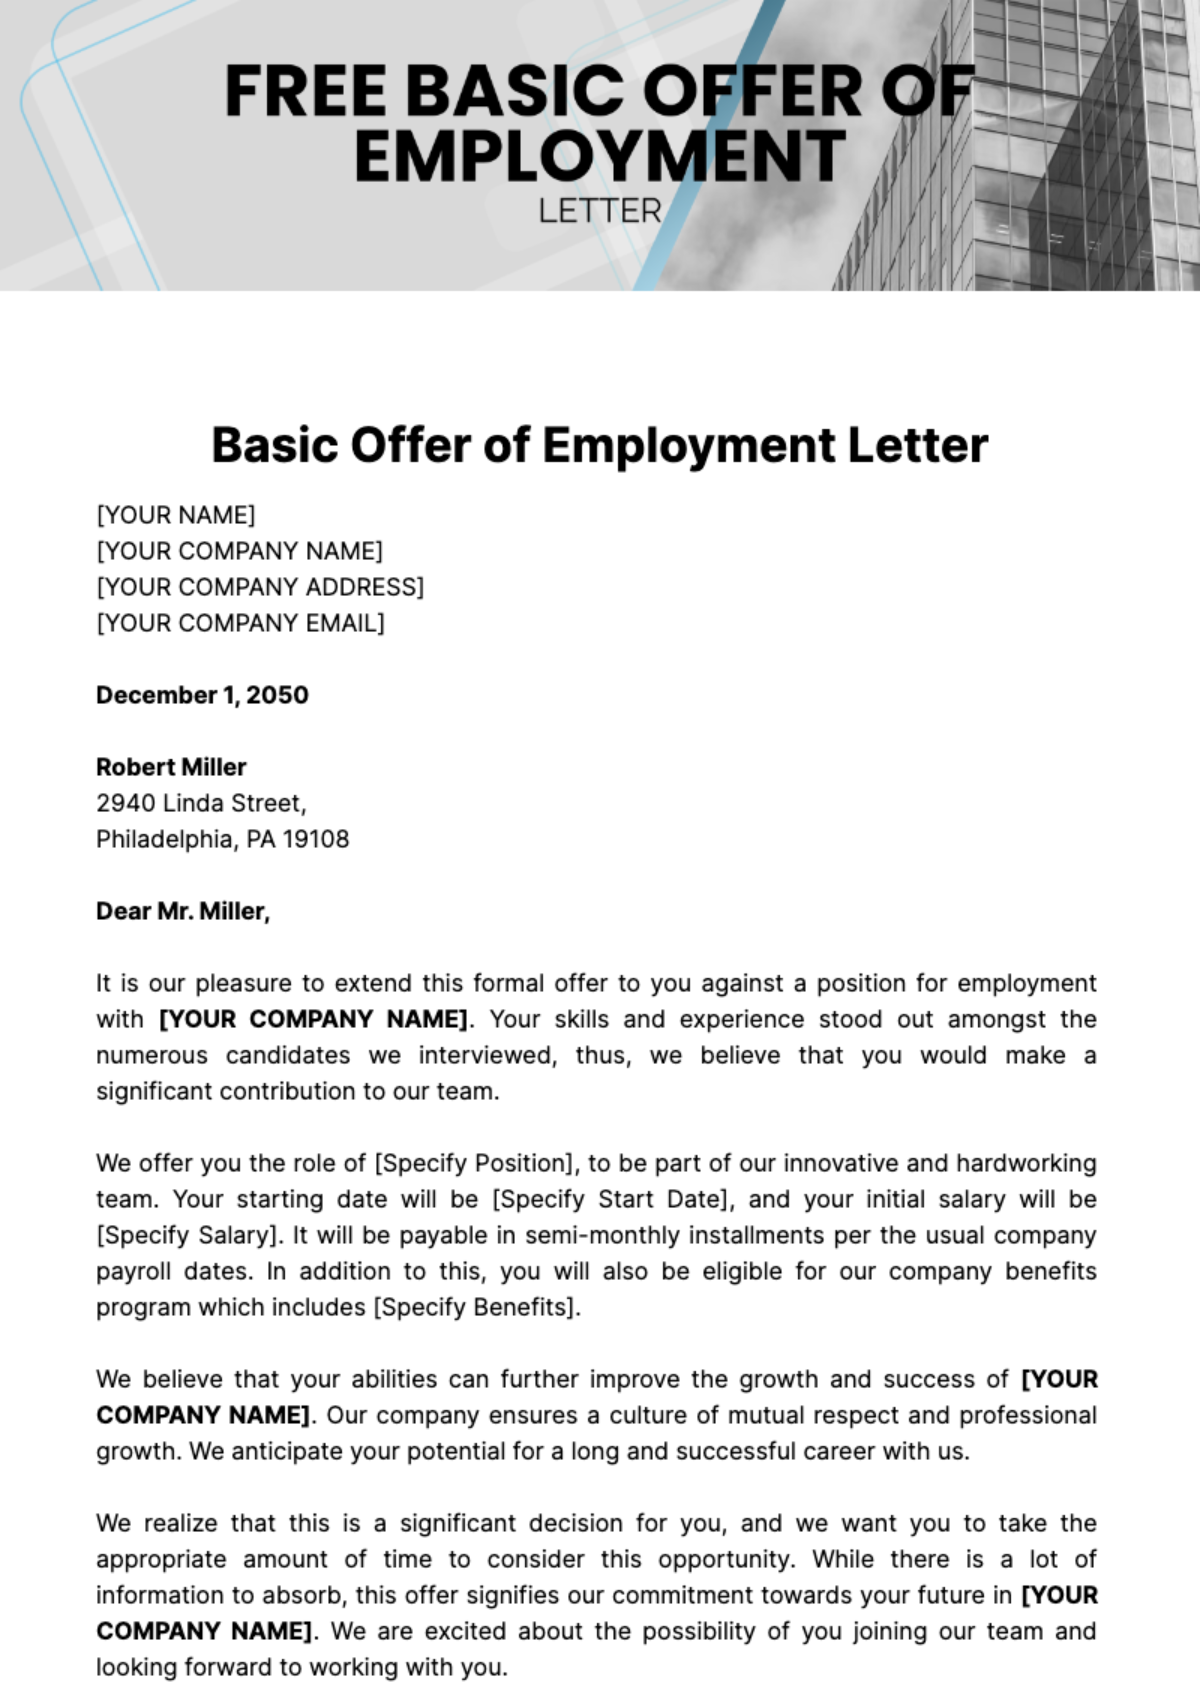 Free Basic Offer of Employment Letter Template